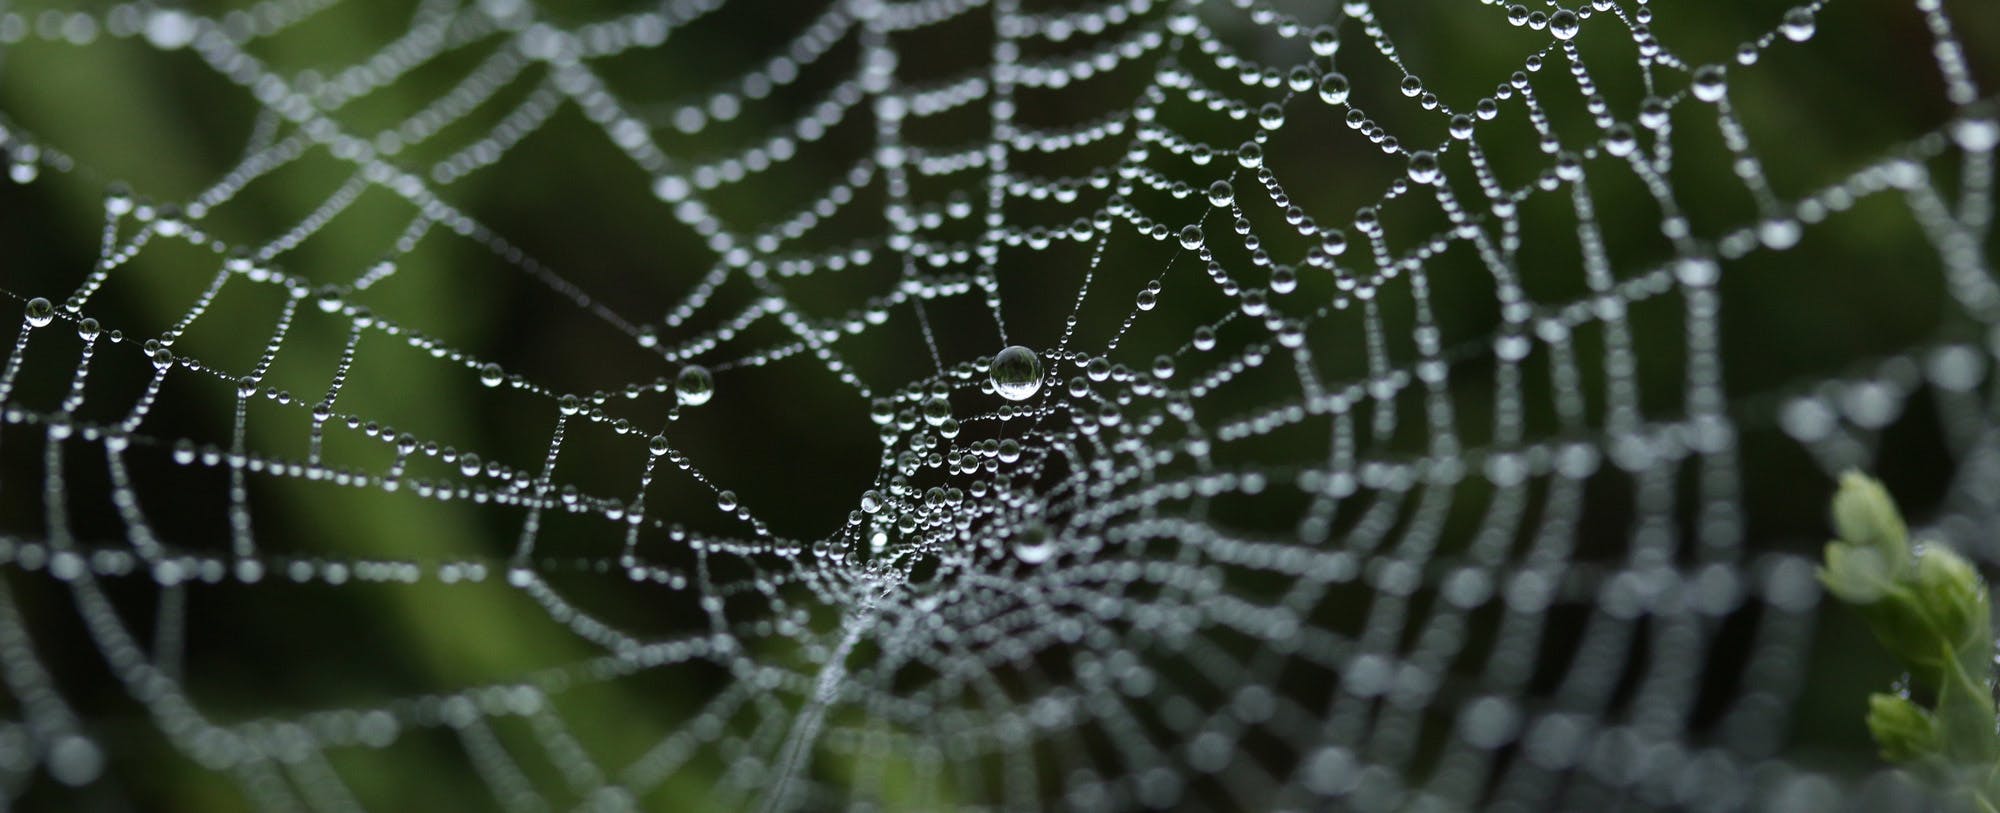 A New Spin on Clothing Fiber: Synthetic Spider Silk